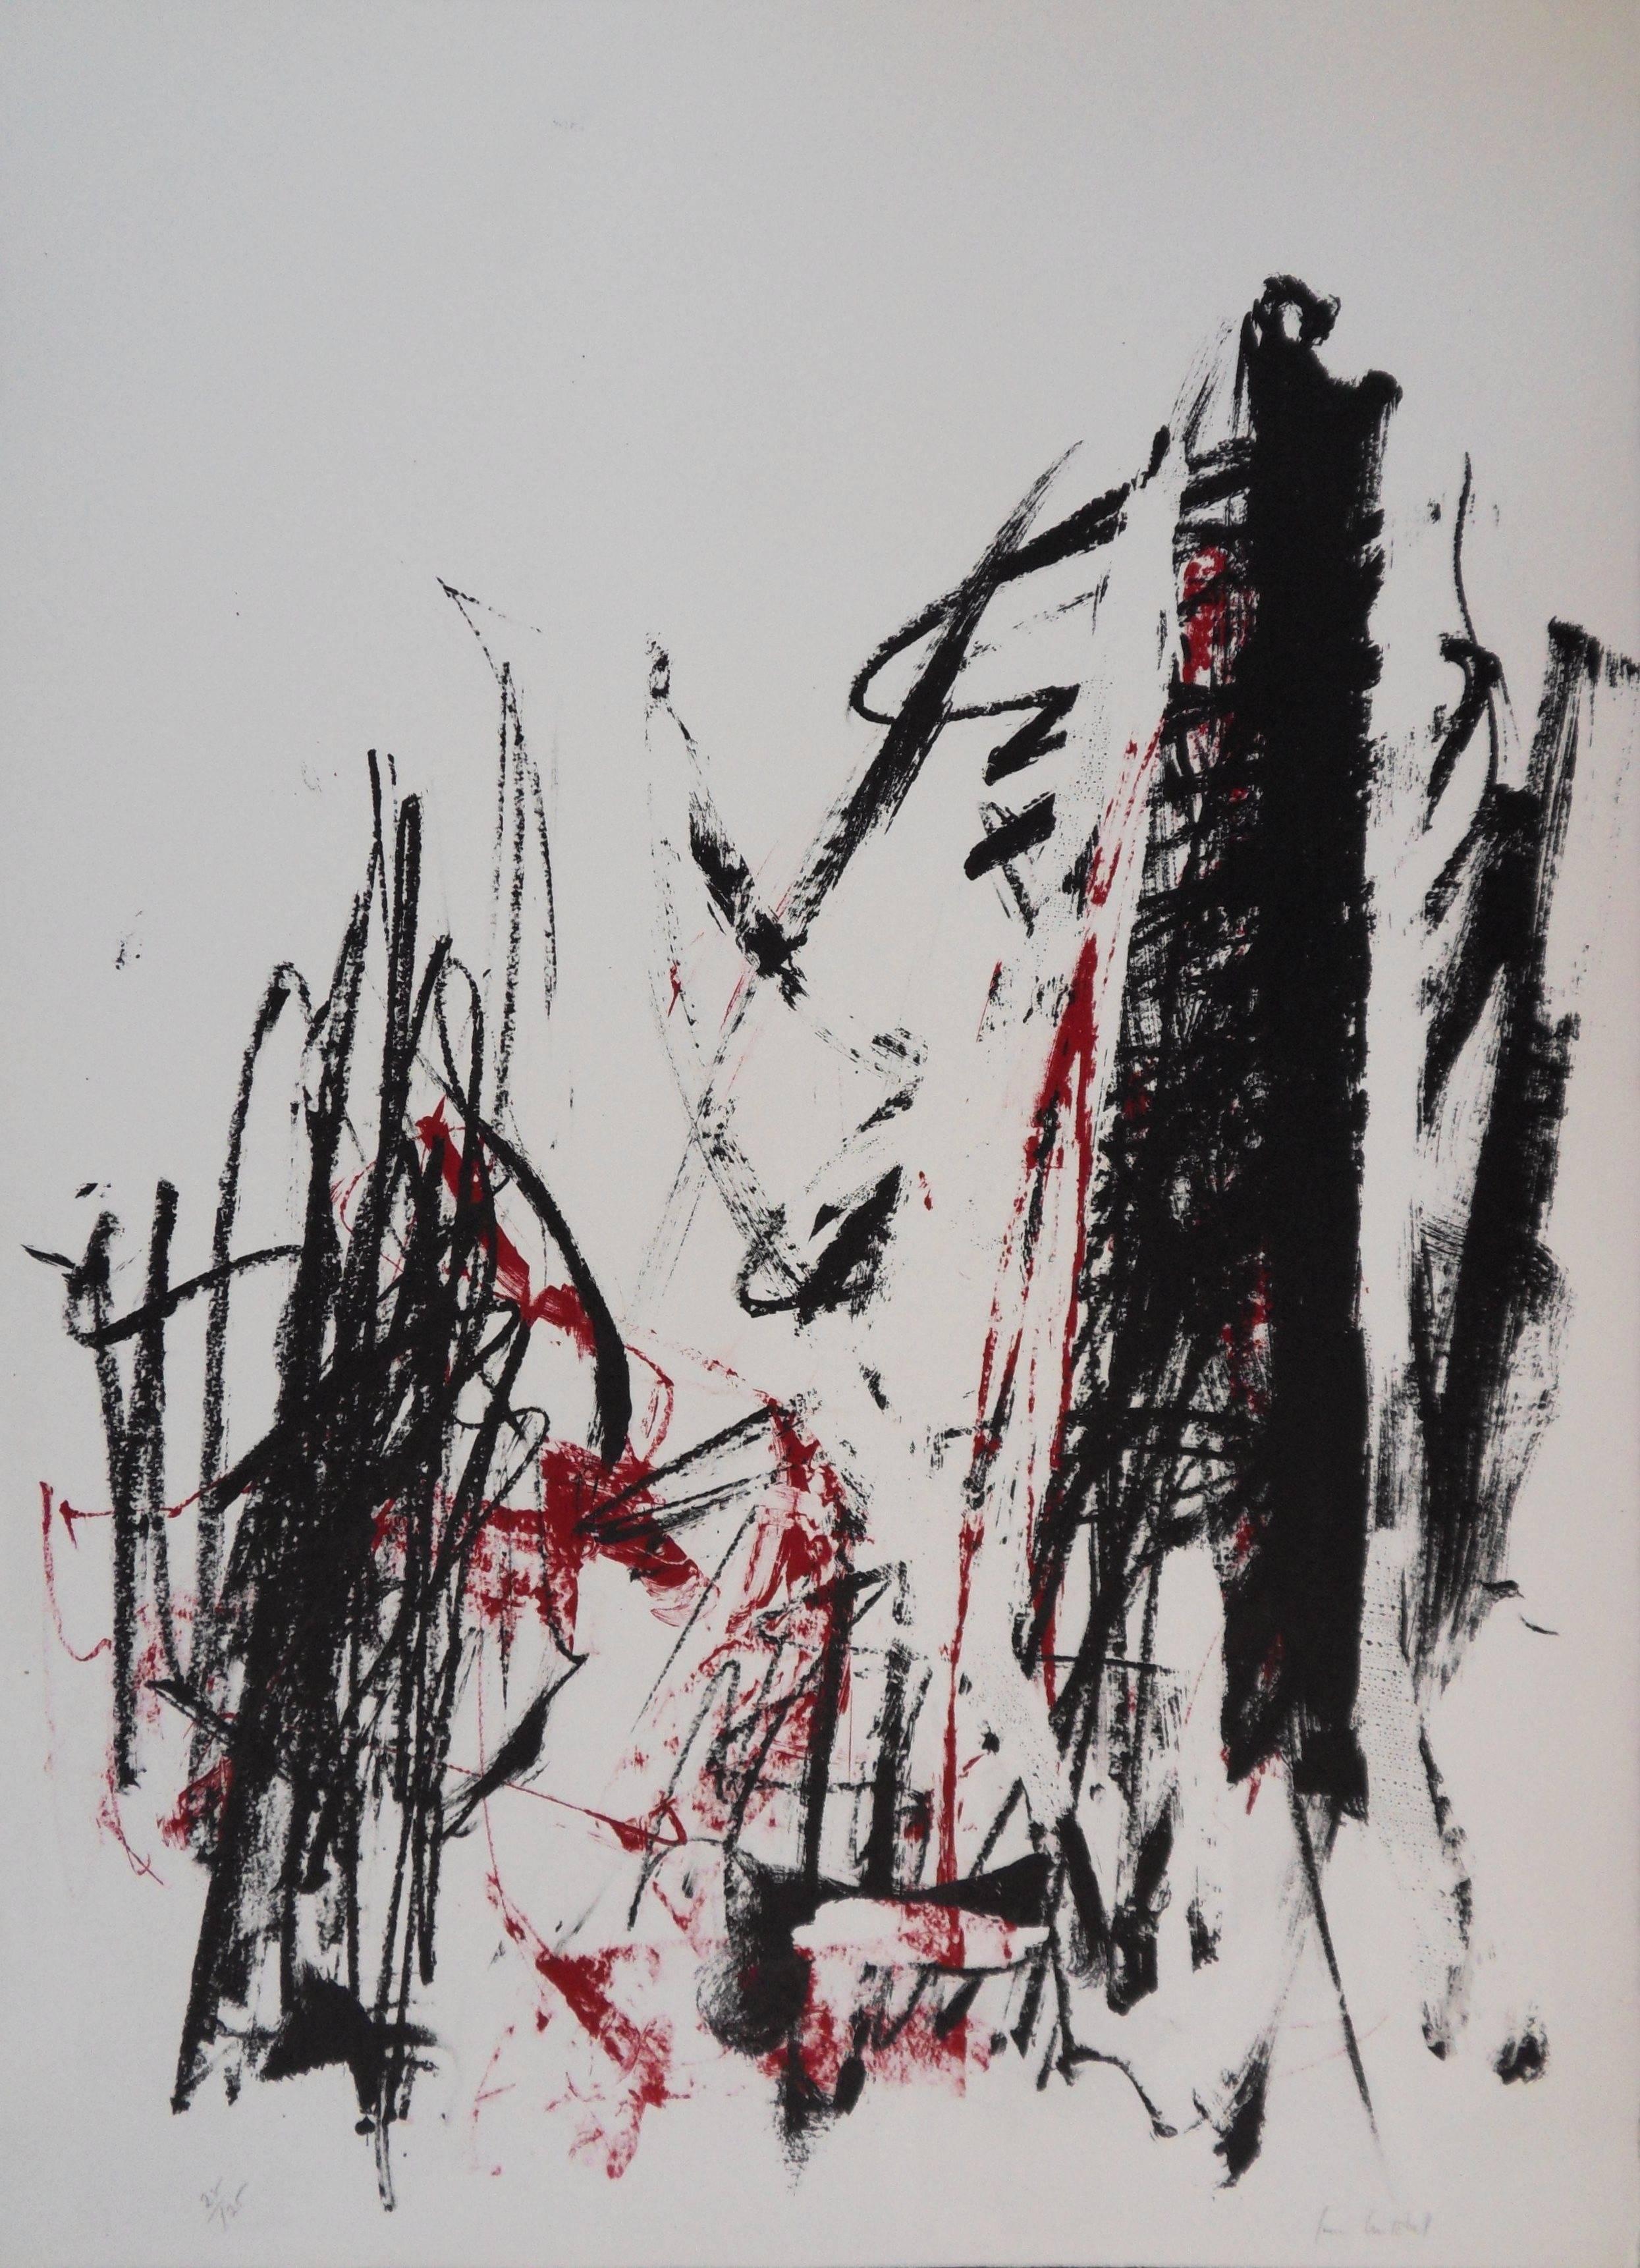 Joan Mitchell Abstract Print - Trees in Red - Original handsigned lithograph - 125 copies